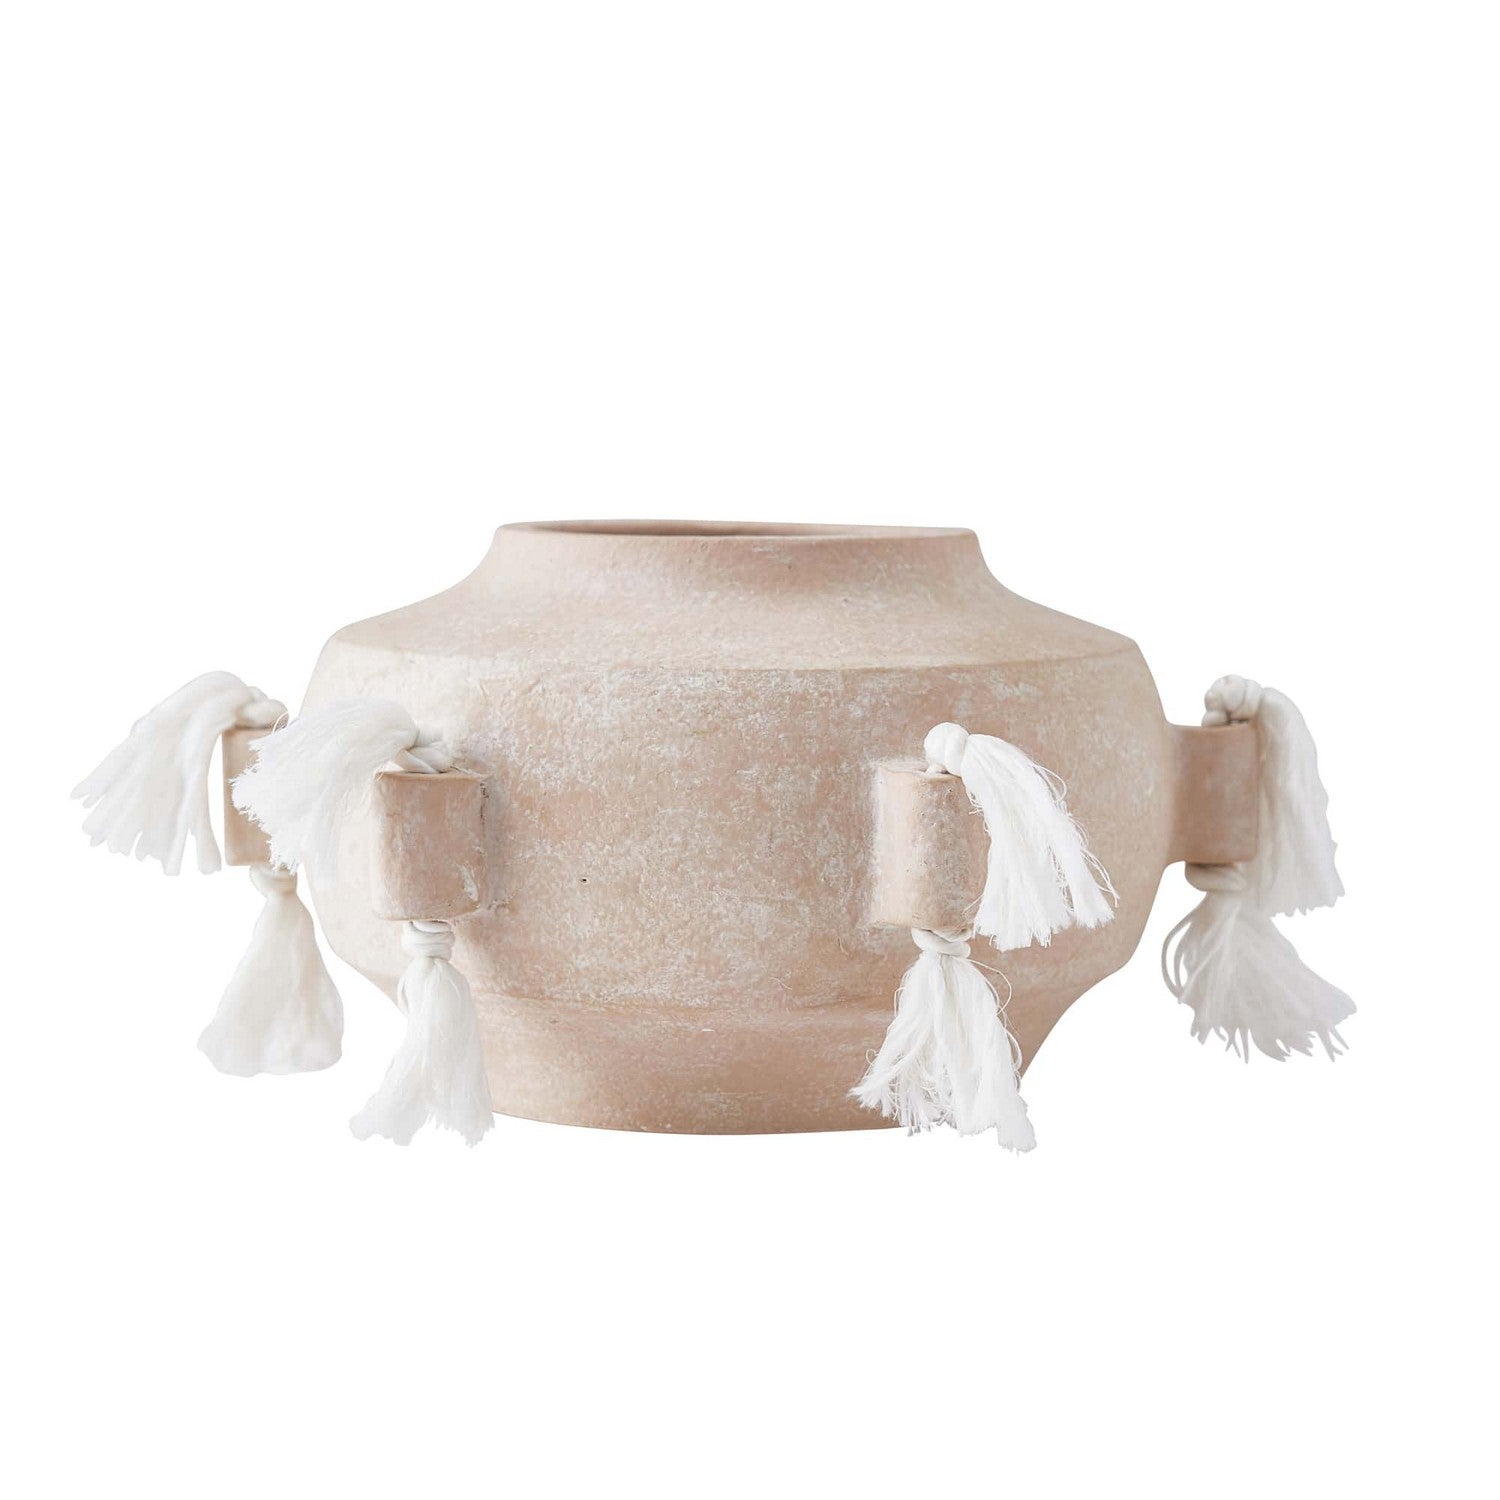 Vase from the Verena collection in Whitewashed finish